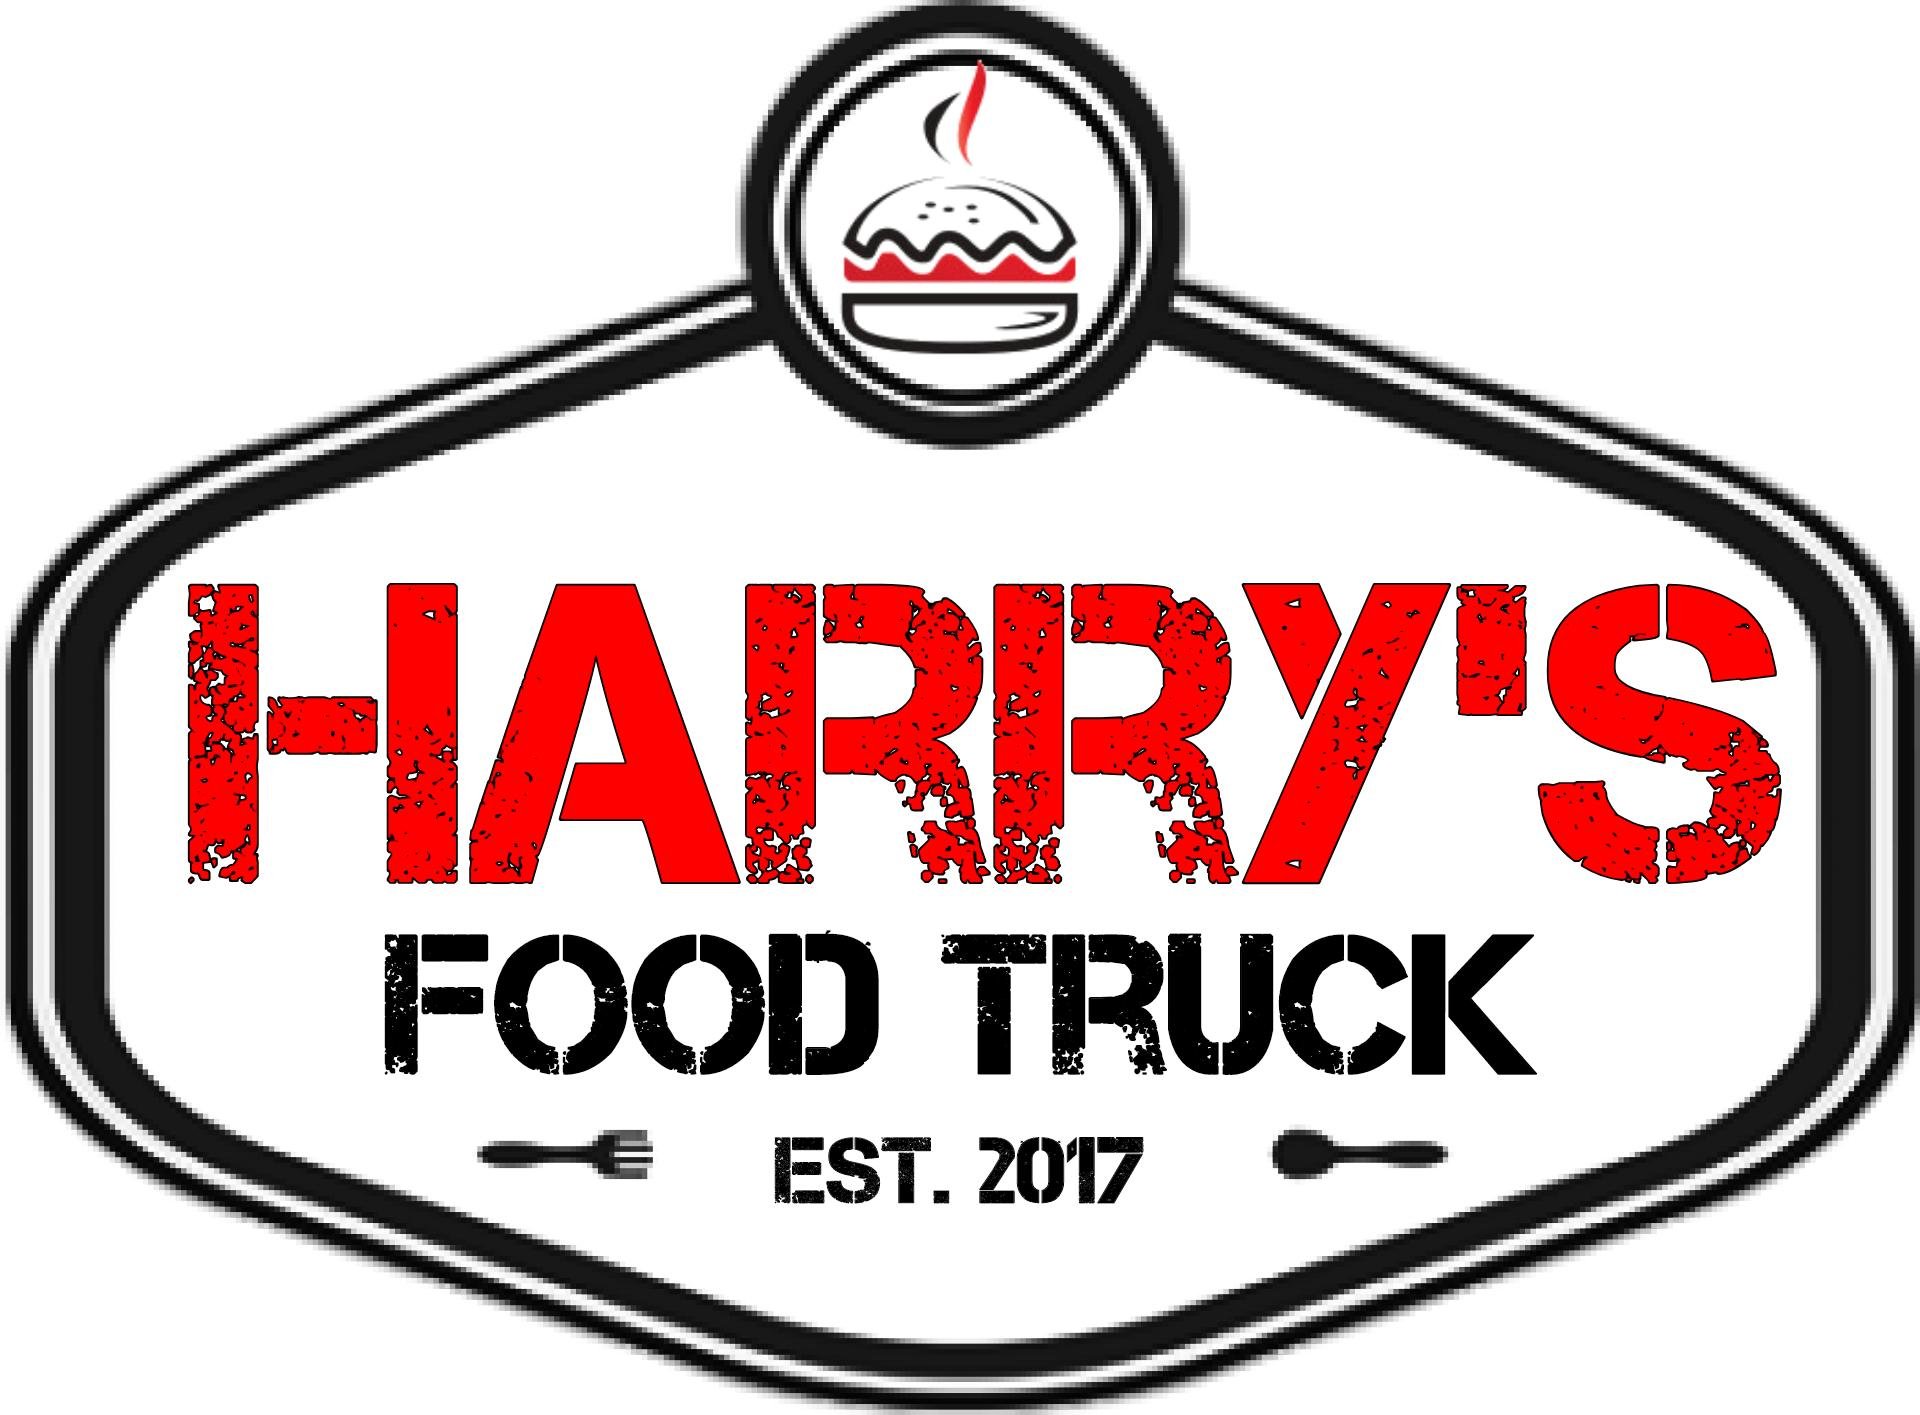 More than just a Food Truck!